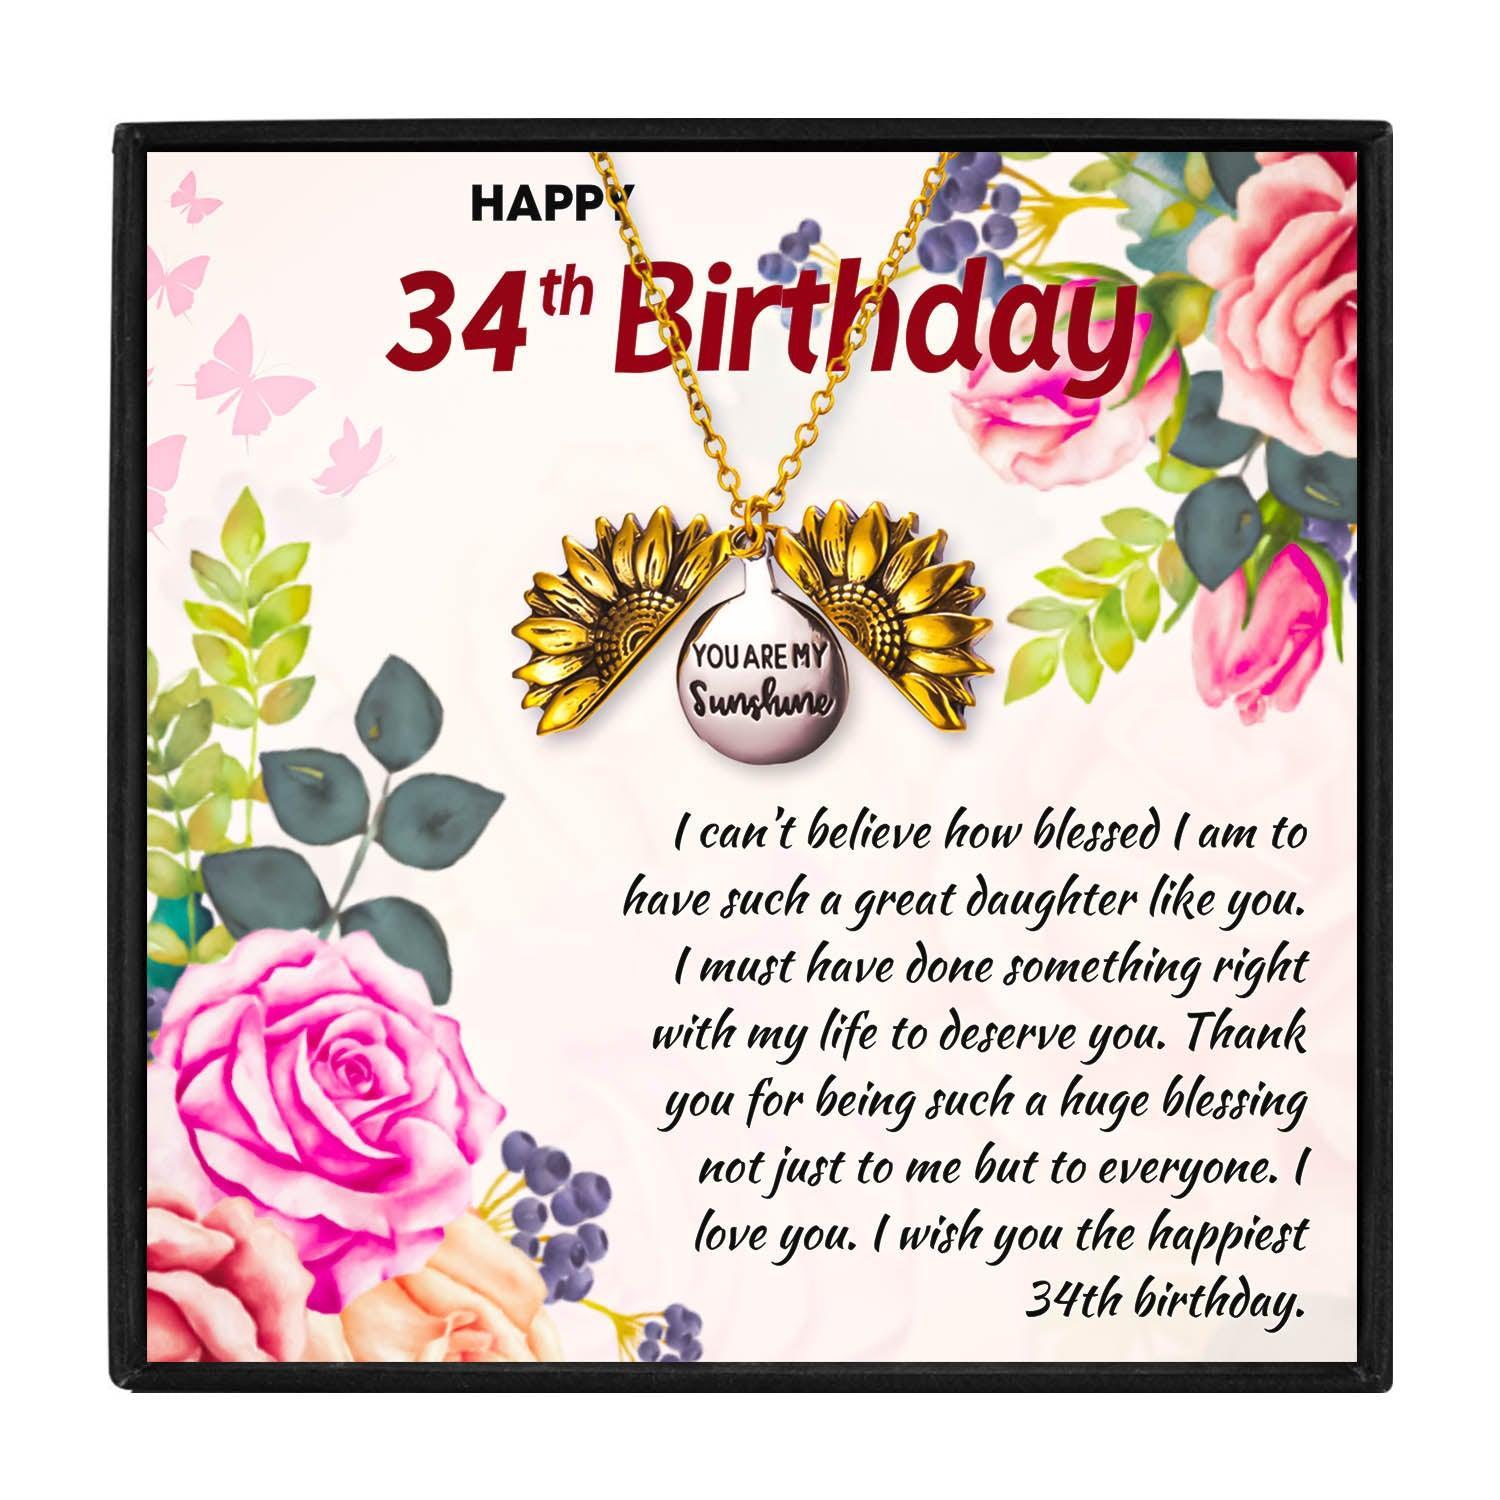 34th Birthday Ideas 34 Year Old Woman for Christmas 2023 | 34th Birthday Ideas 34 Year Old Woman - undefined | 34 Birthday Ideas Gifts, 34th Birthday Gifts, 34th Birthday Gifts for Women | From Hunny Life | hunnylife.com